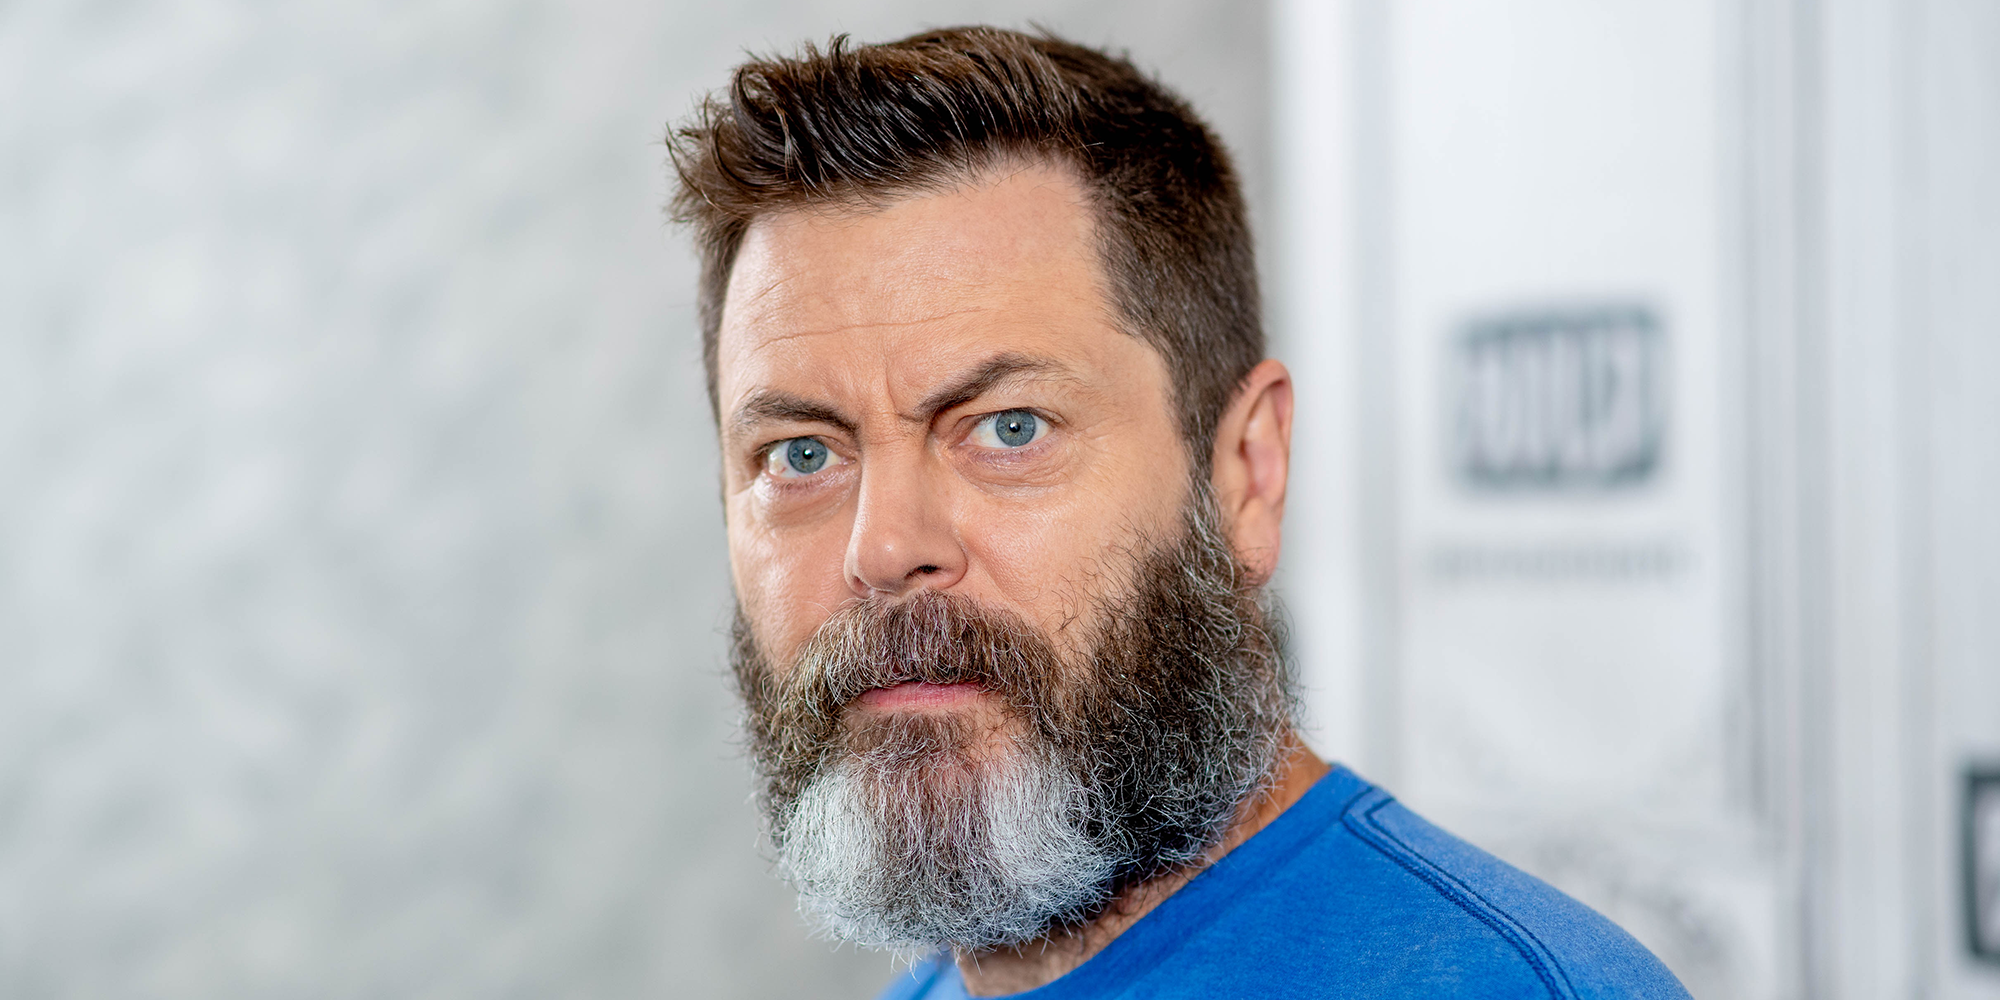 mh-offerman-1528729621.png